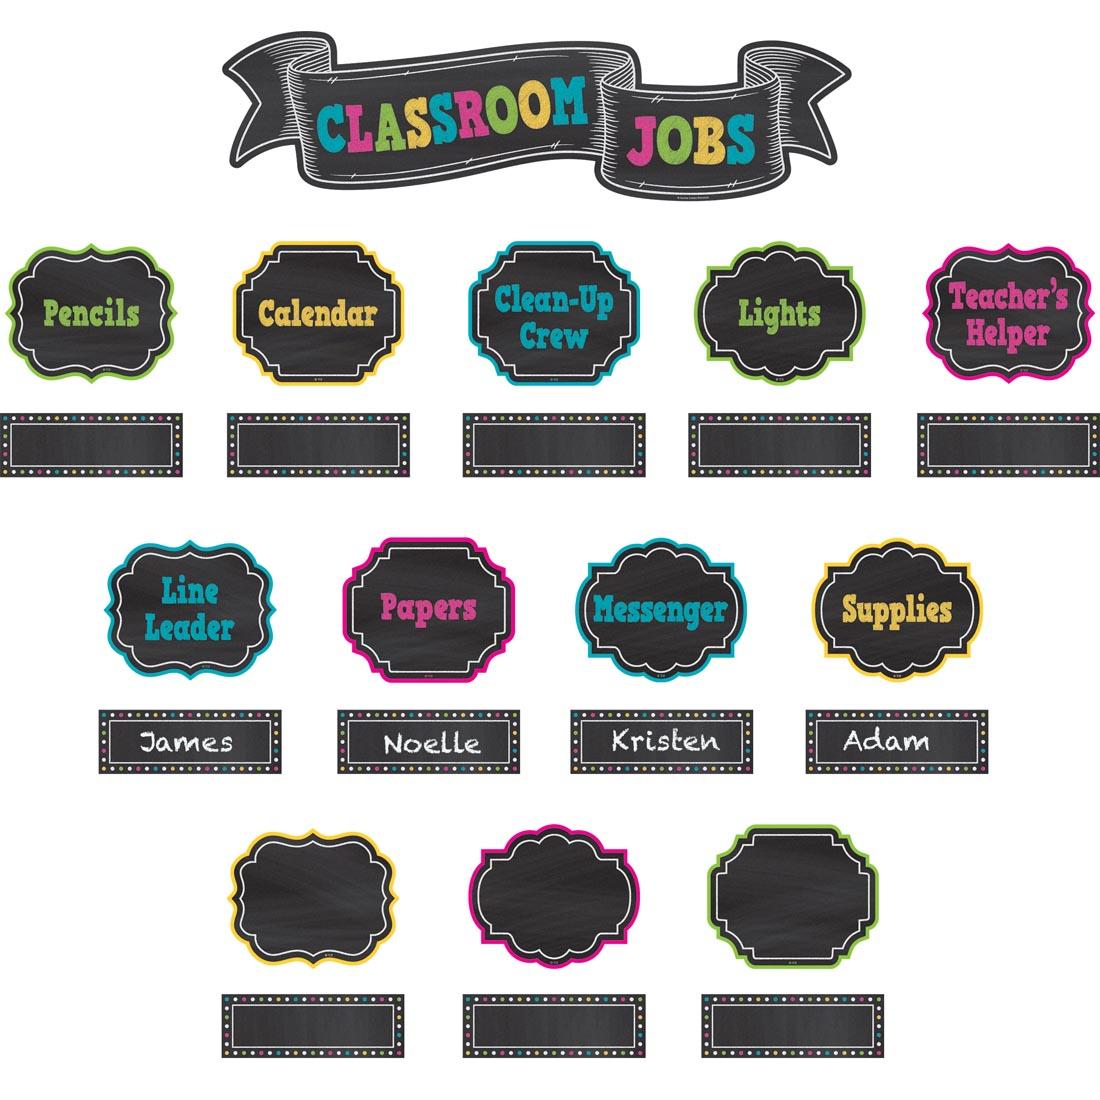 Classroom Jobs Mini Bulletin Board Set from the Chalkboard Brights collection by Teacher Created Resources